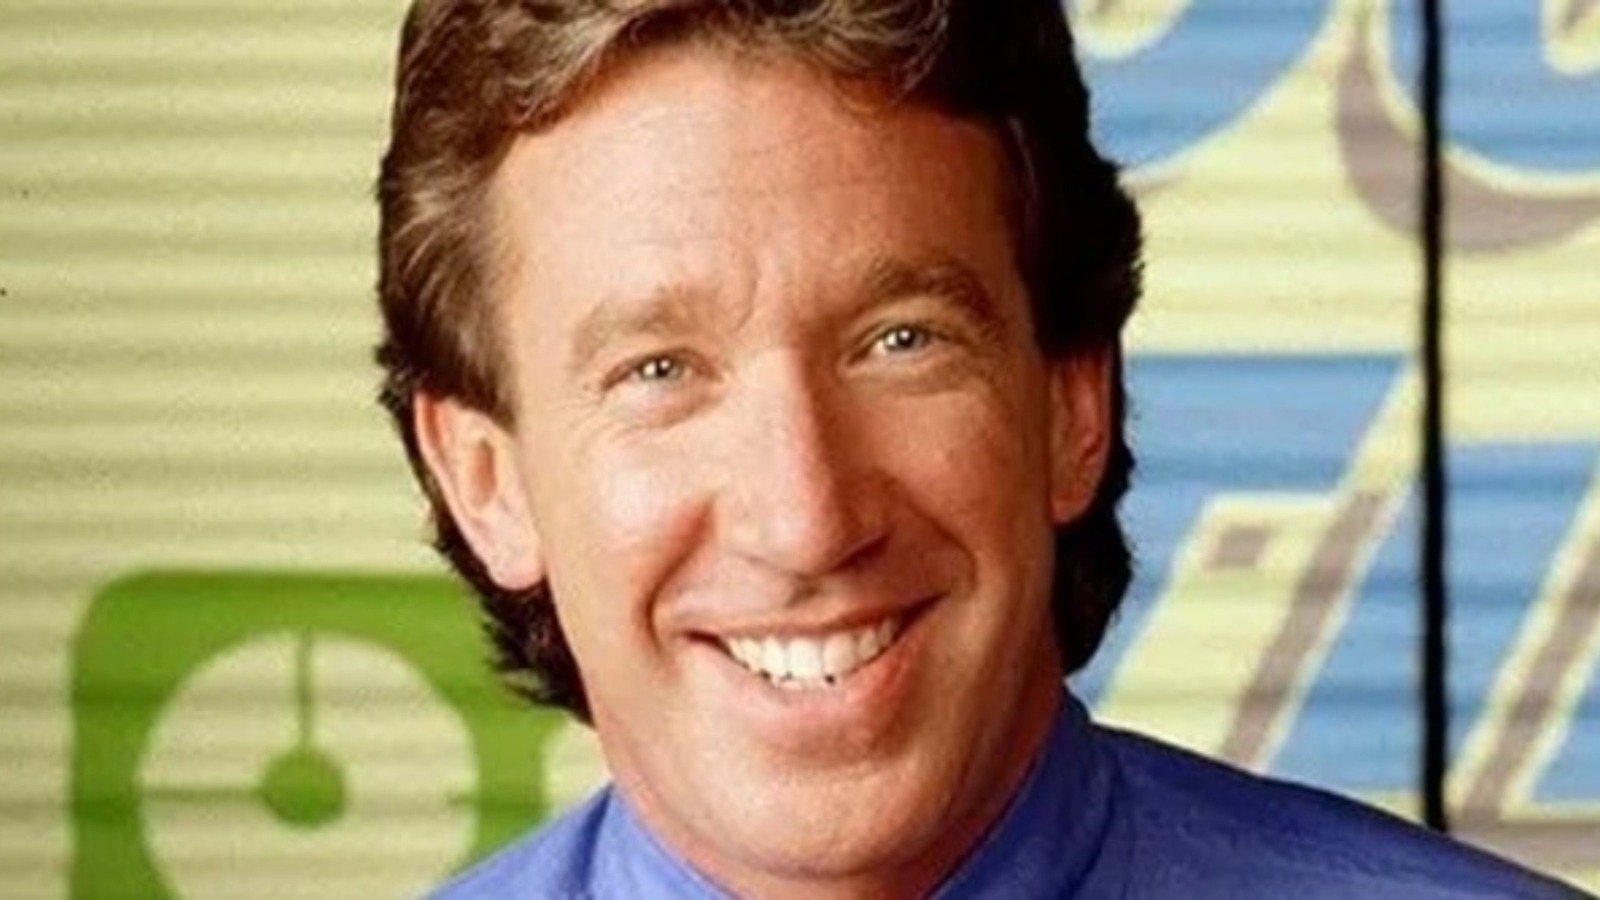 The Inspiration For Wilson On Home Improvement Might Surprise You